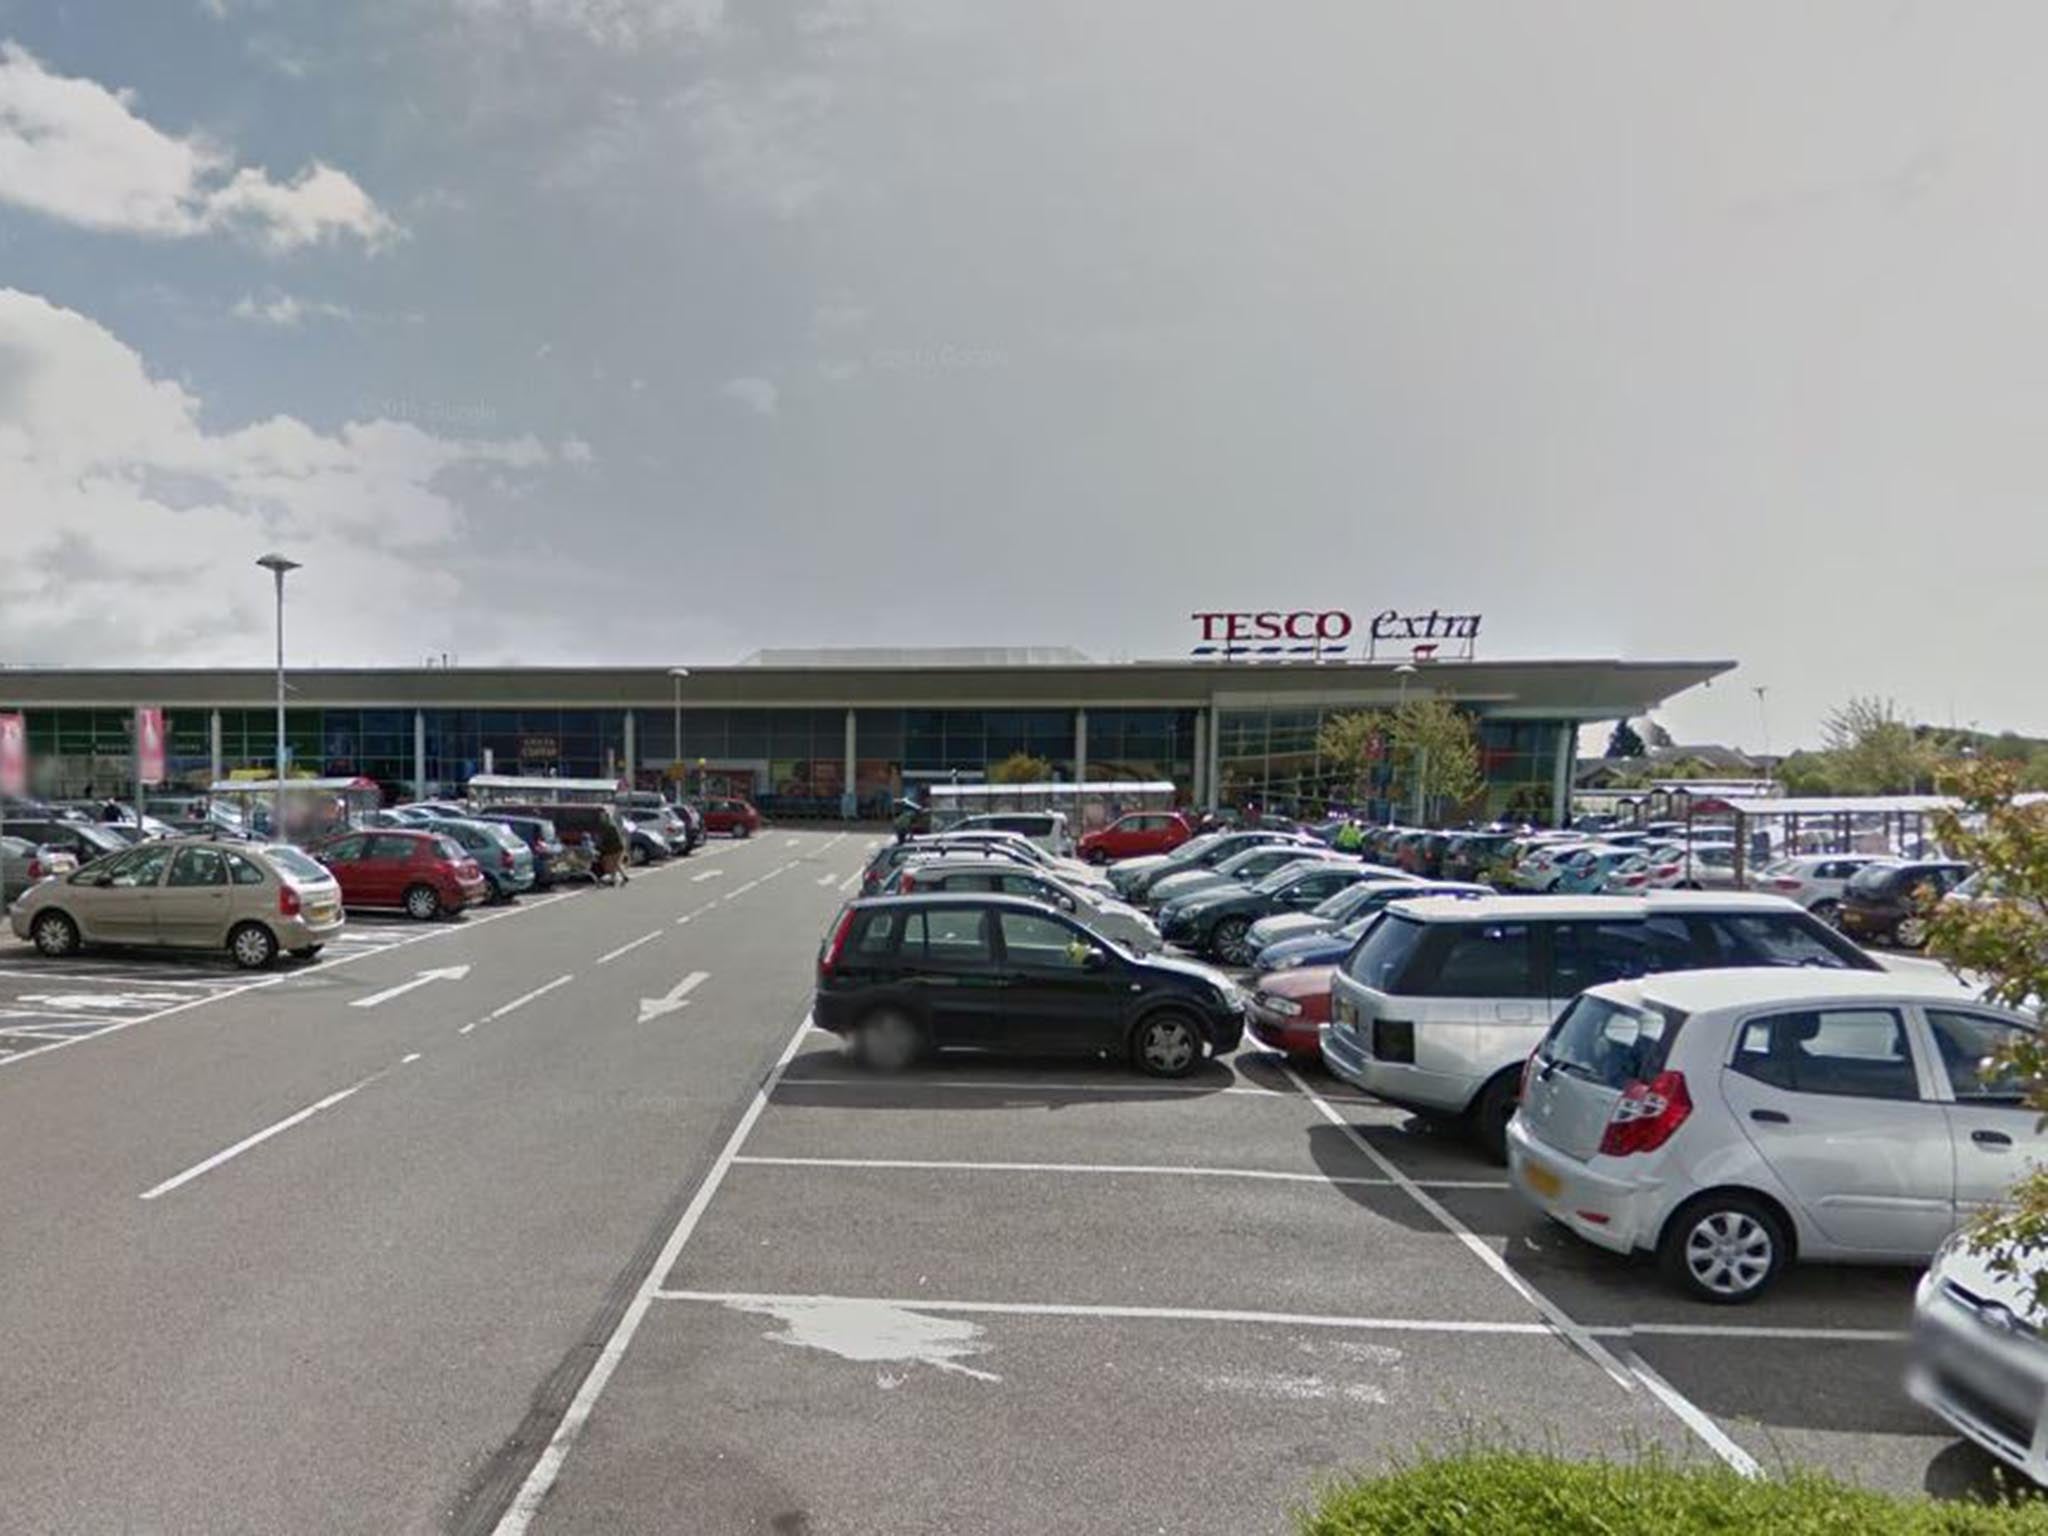 The discovery was made in undergrowth at the Tesco Extra store in North Harbour, Portsmouth, Hampshire.